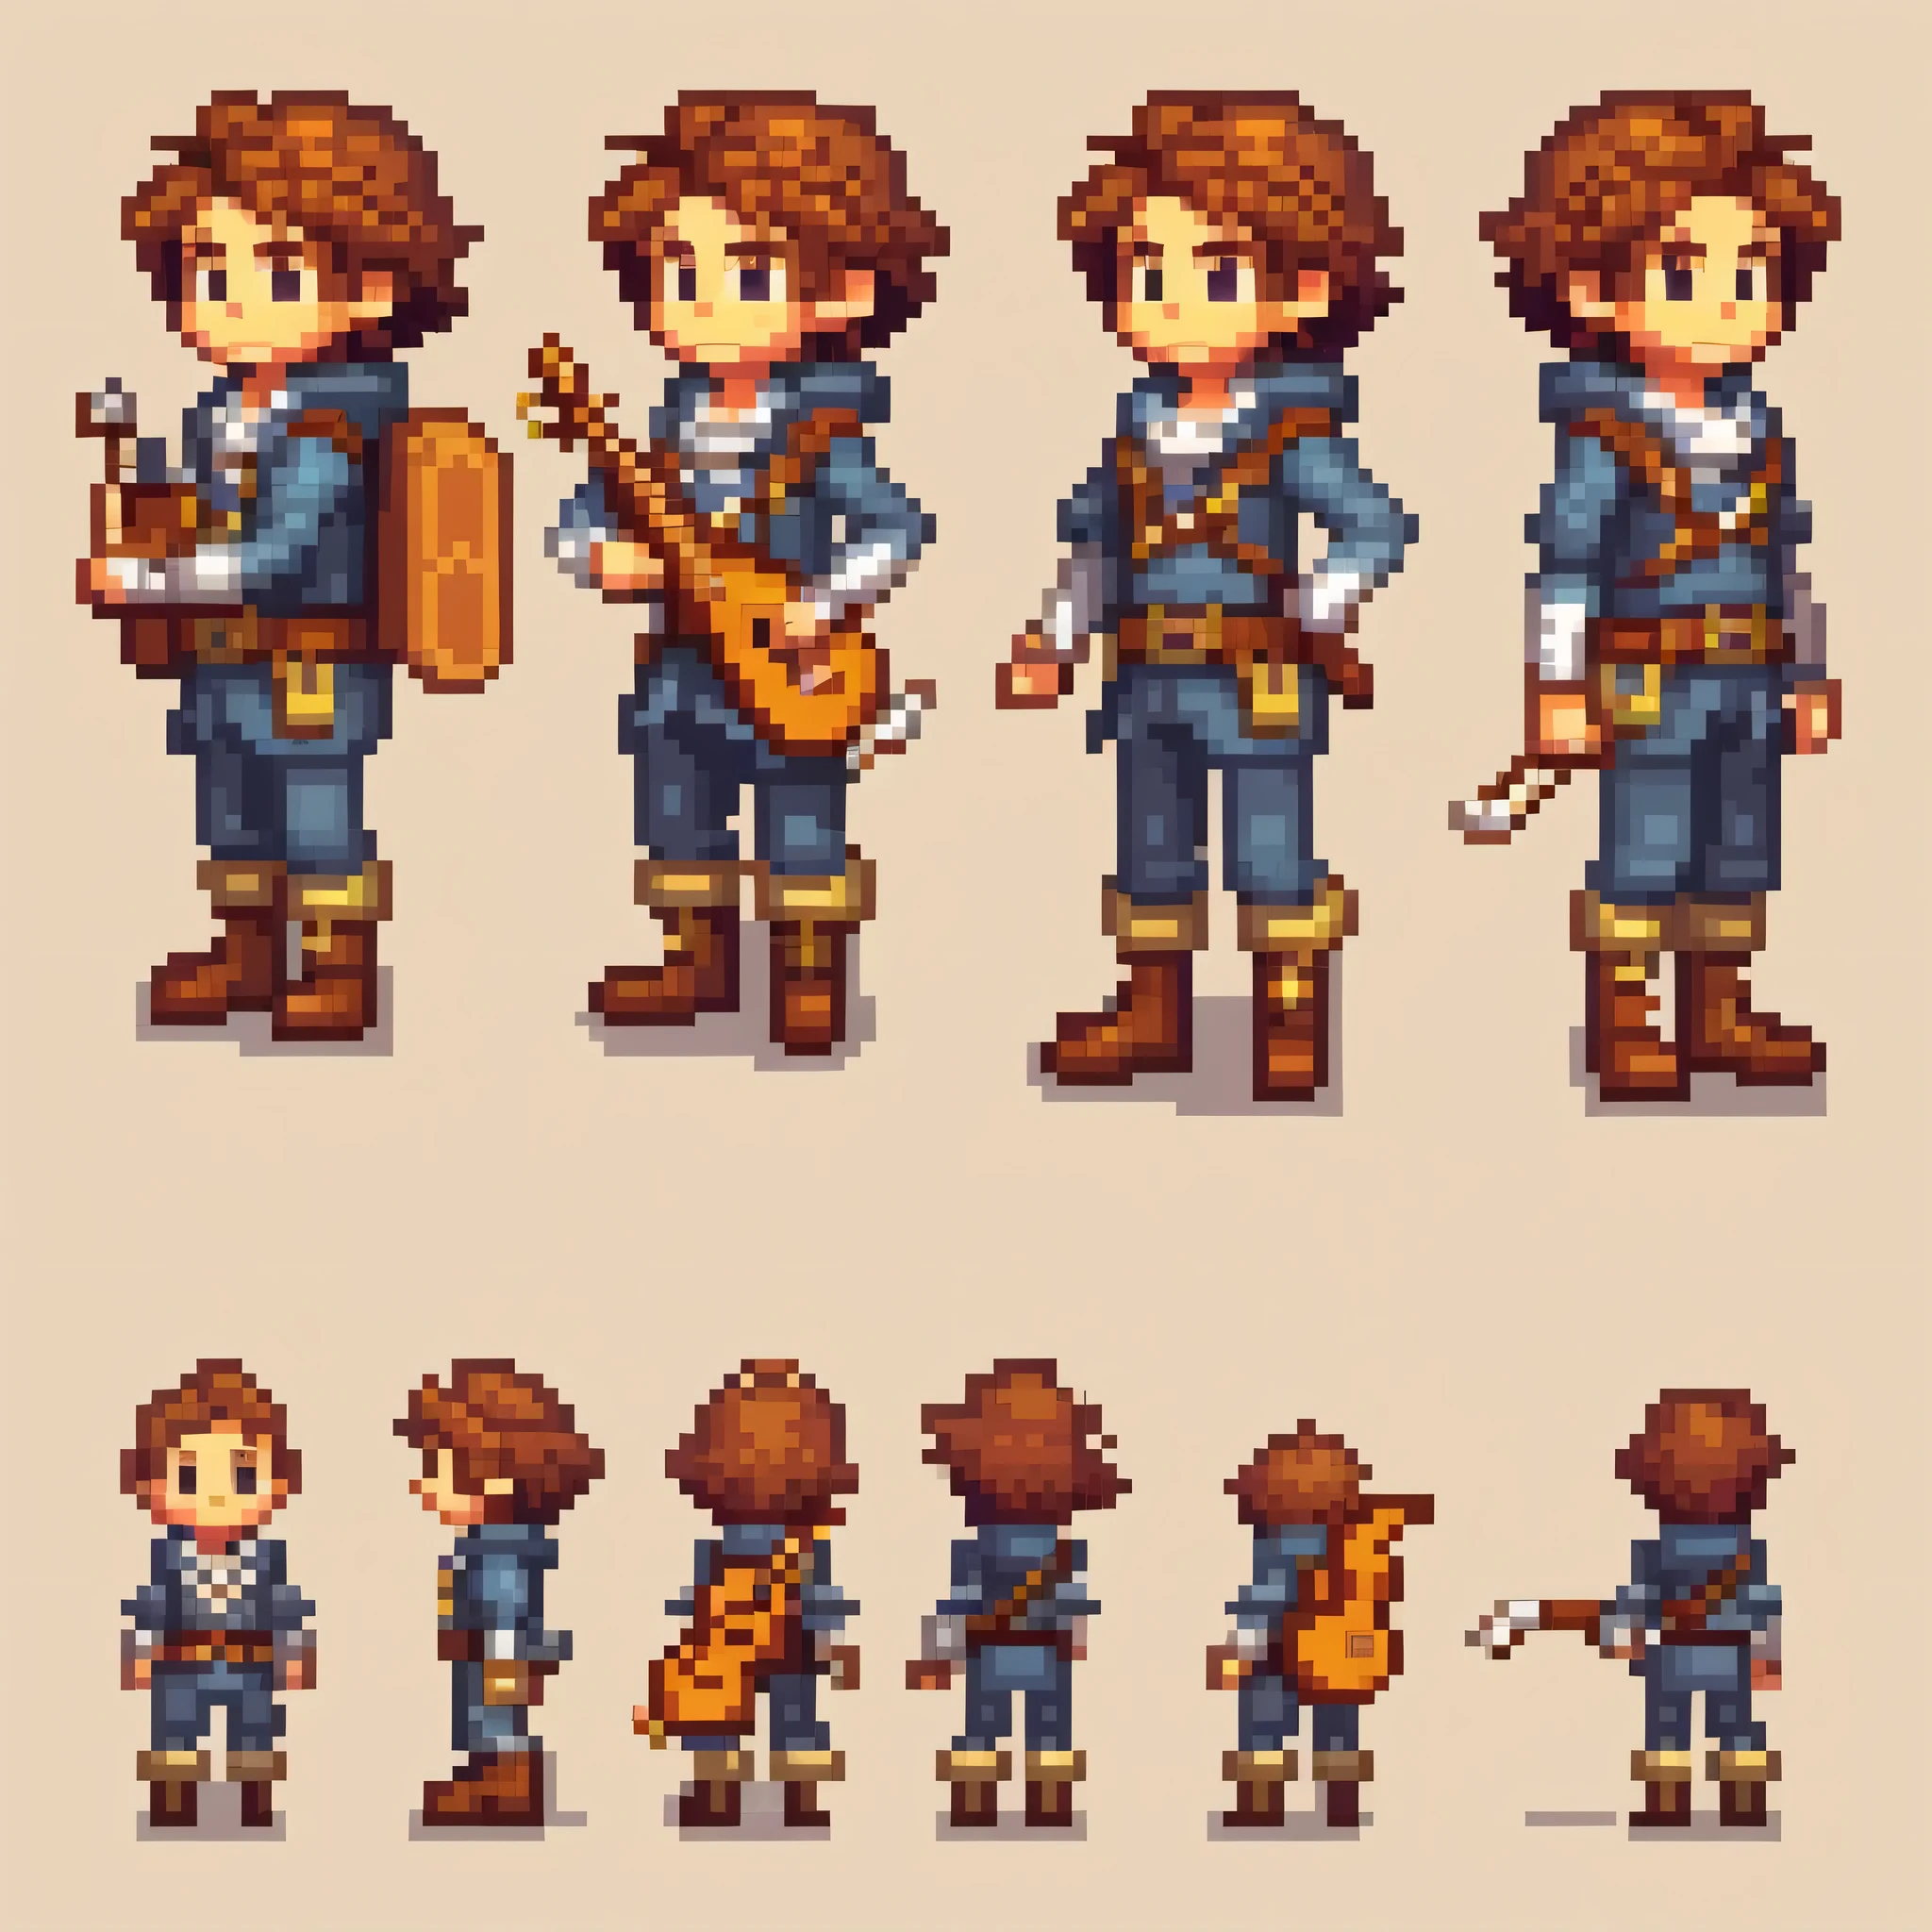 Pixel art,Pixel art,Create an original character design sheet,main character of the game,boy,juvenile,adventurer&#39;clothing,natural perm,musical instrument,bard,((3 views,whole body, background,multiple views,High resolution)),multiple views,multiple poses,Active,action pose,dynamic,nice,cute,masterpiece,highest quality,In detail,Gracefully,RPG,Famicom,multiple characters,multiple costumes,Final Fantasy,boldly,